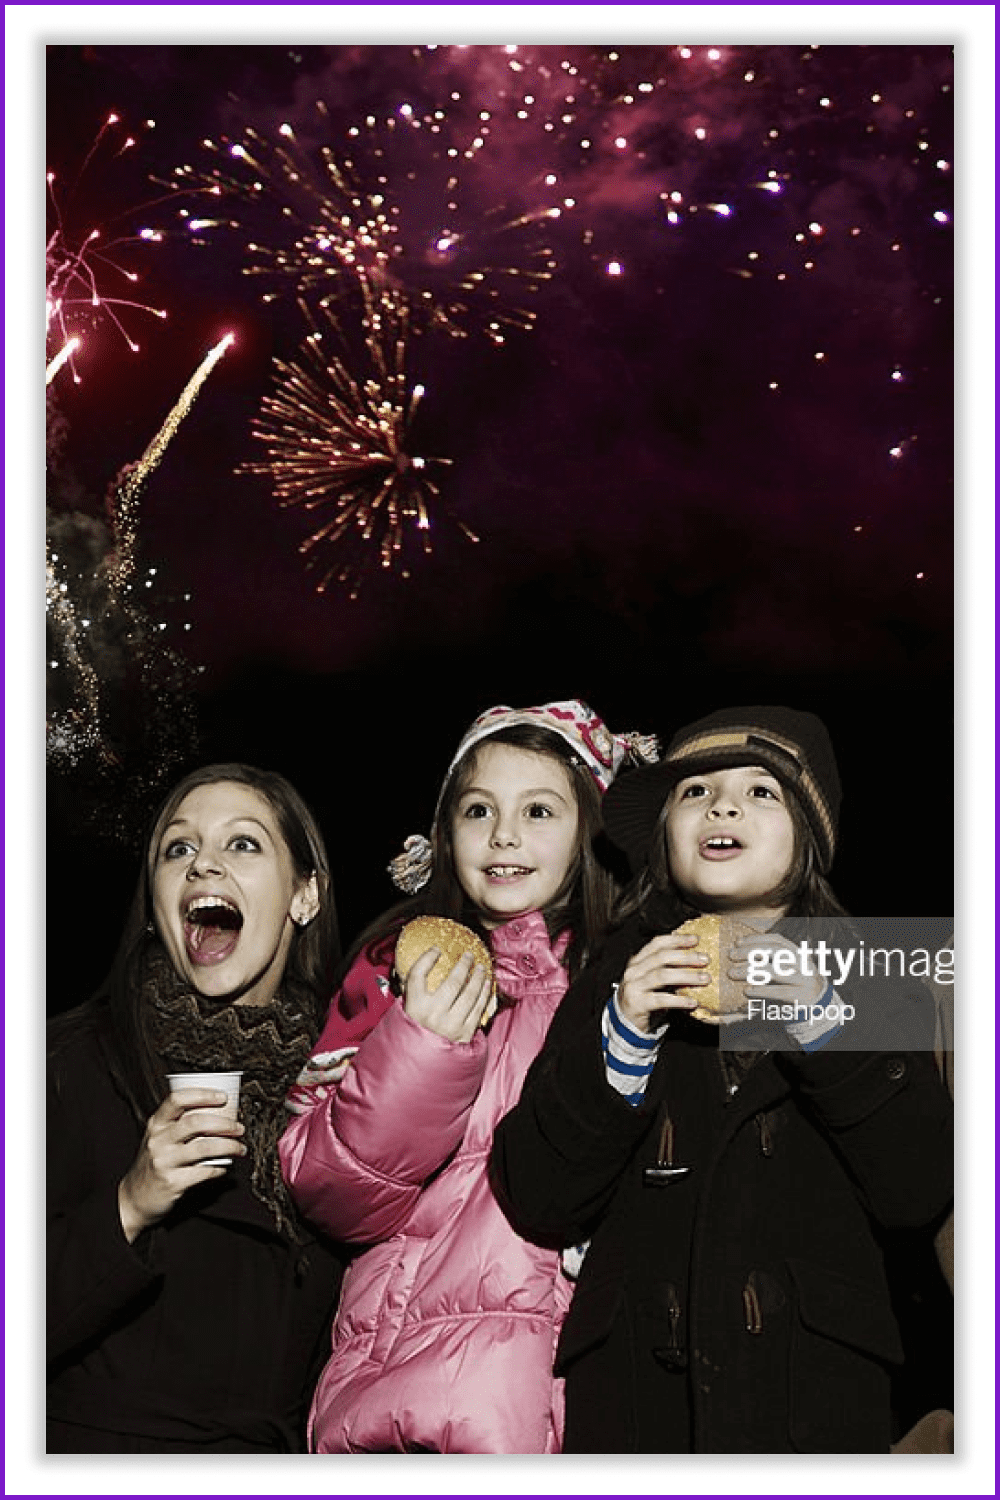 Mom and two girls with hamburgers watch fireworks in the dark sky.